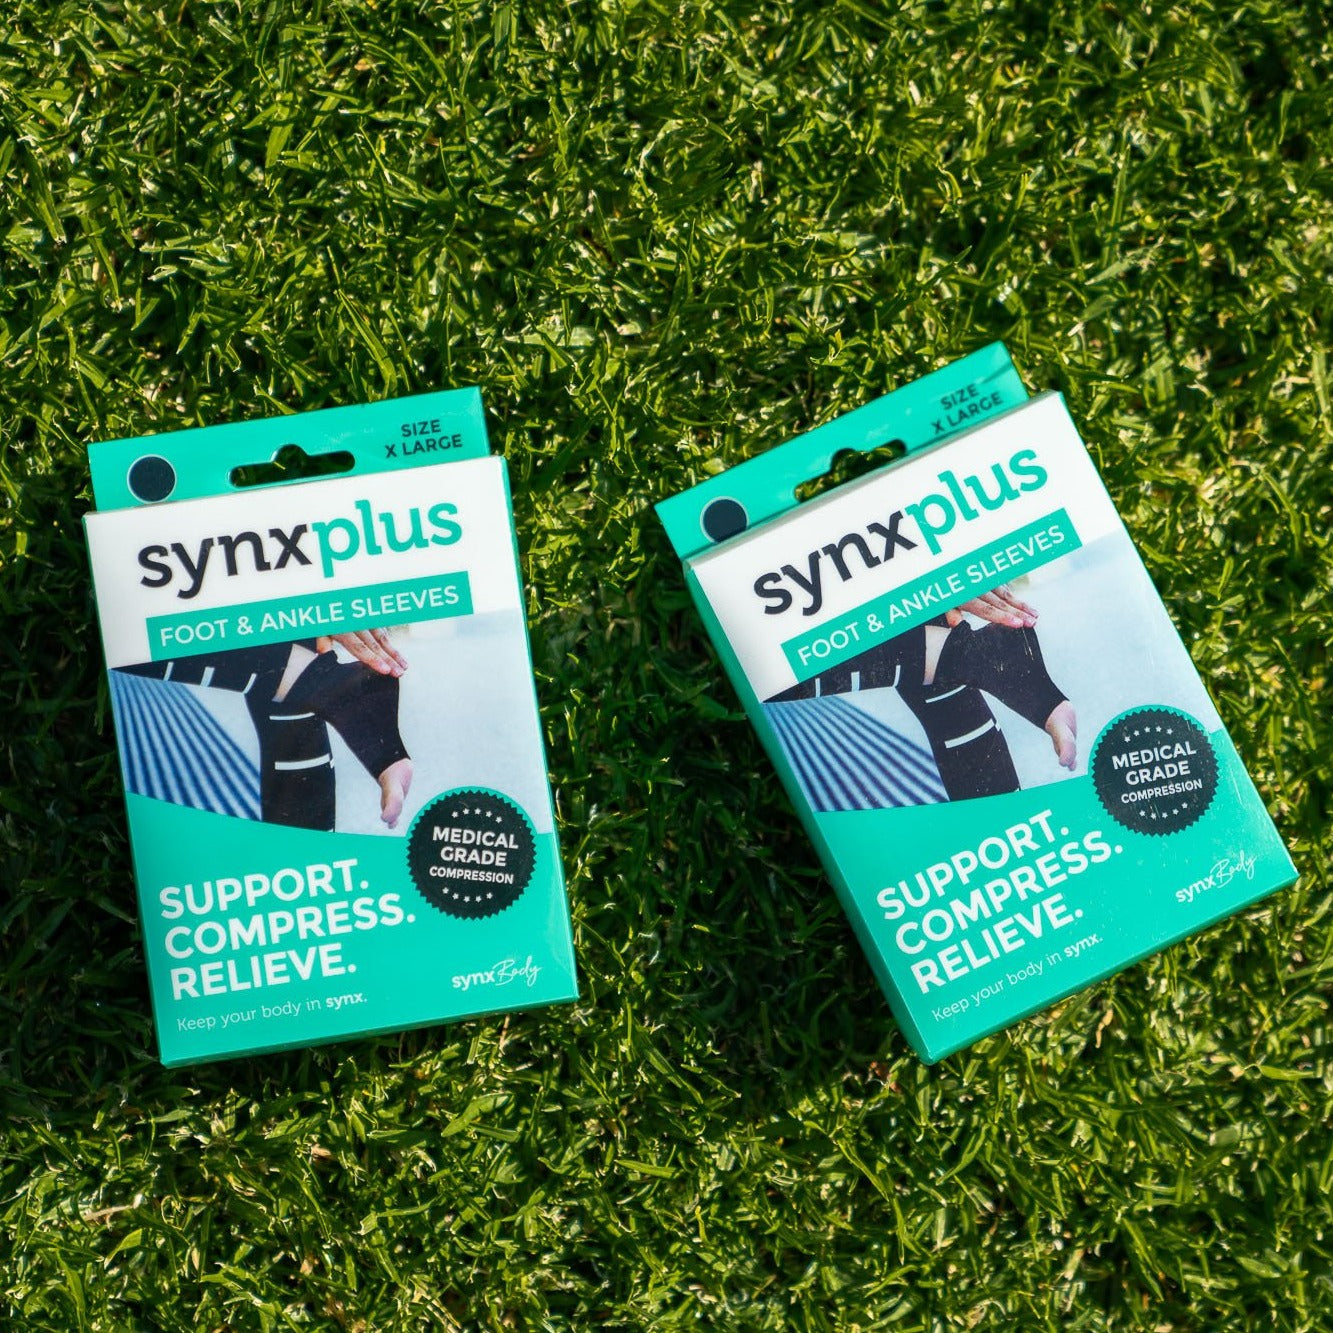 packets of synxplus foot and ankle compression sleeves to assist relieve pain, swelling, inflammation laying on the grass